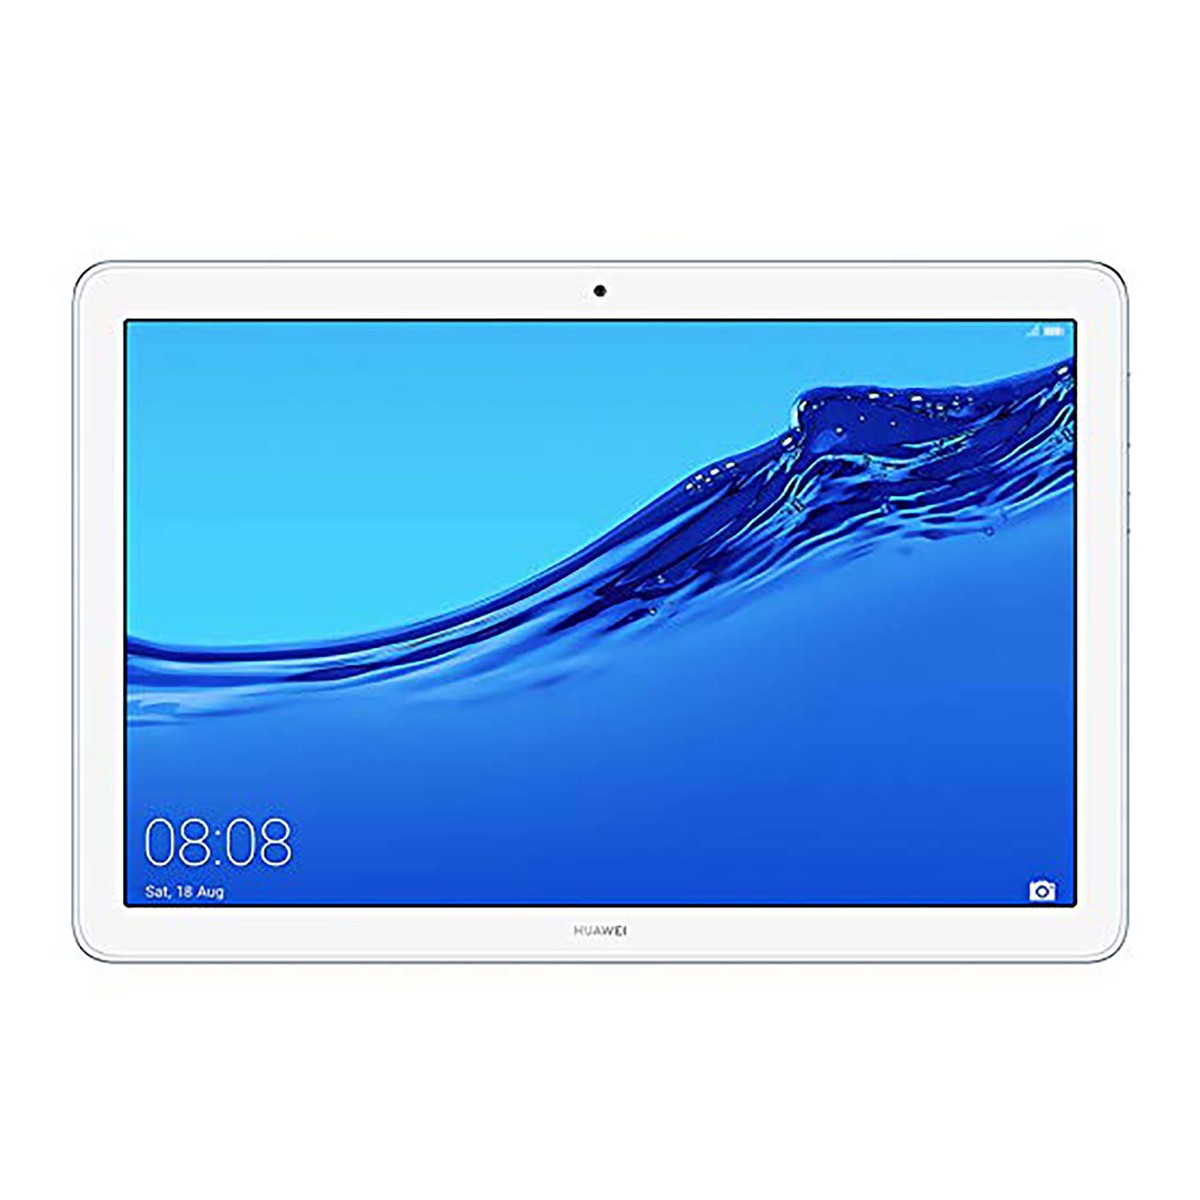 In time ventilation Fumble Huawei MediaPad T5 Tablet ,Wifi,32GB,3 GB RAM,10.1 inches IPS,Mist Blue  Online at Best Price | Tablets | Lulu UAE